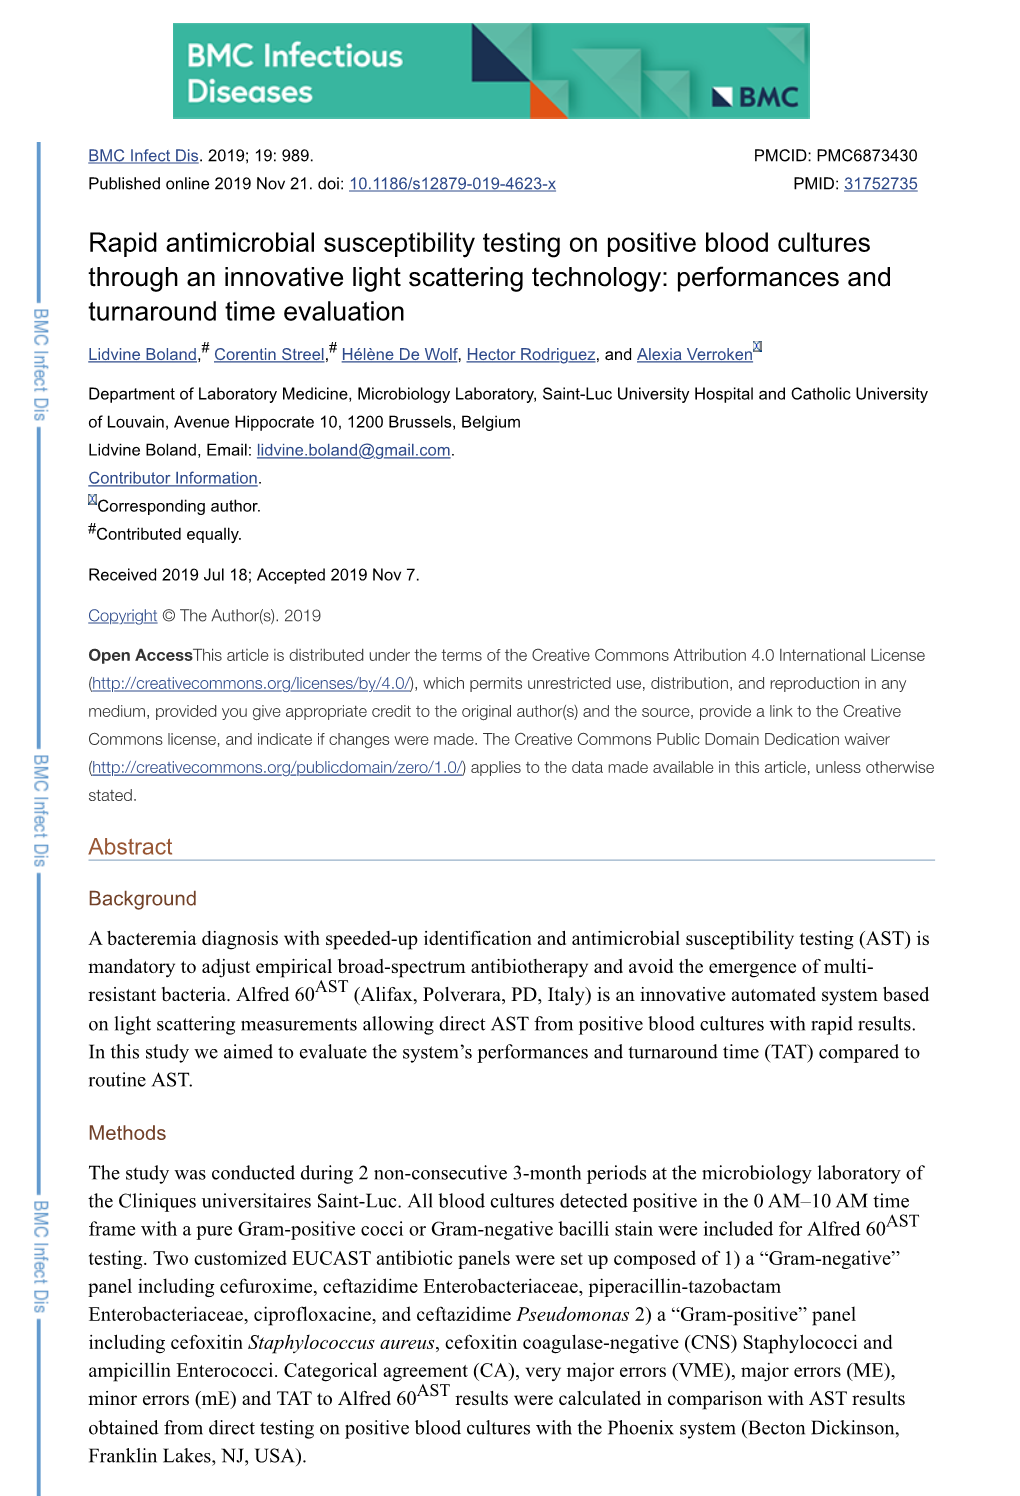 Rapid Antimicrobial Susceptibility Testing on Positive Blood Cultures Through an Innovative Light Scattering Technology: Performances and Turnaround Time Evaluation